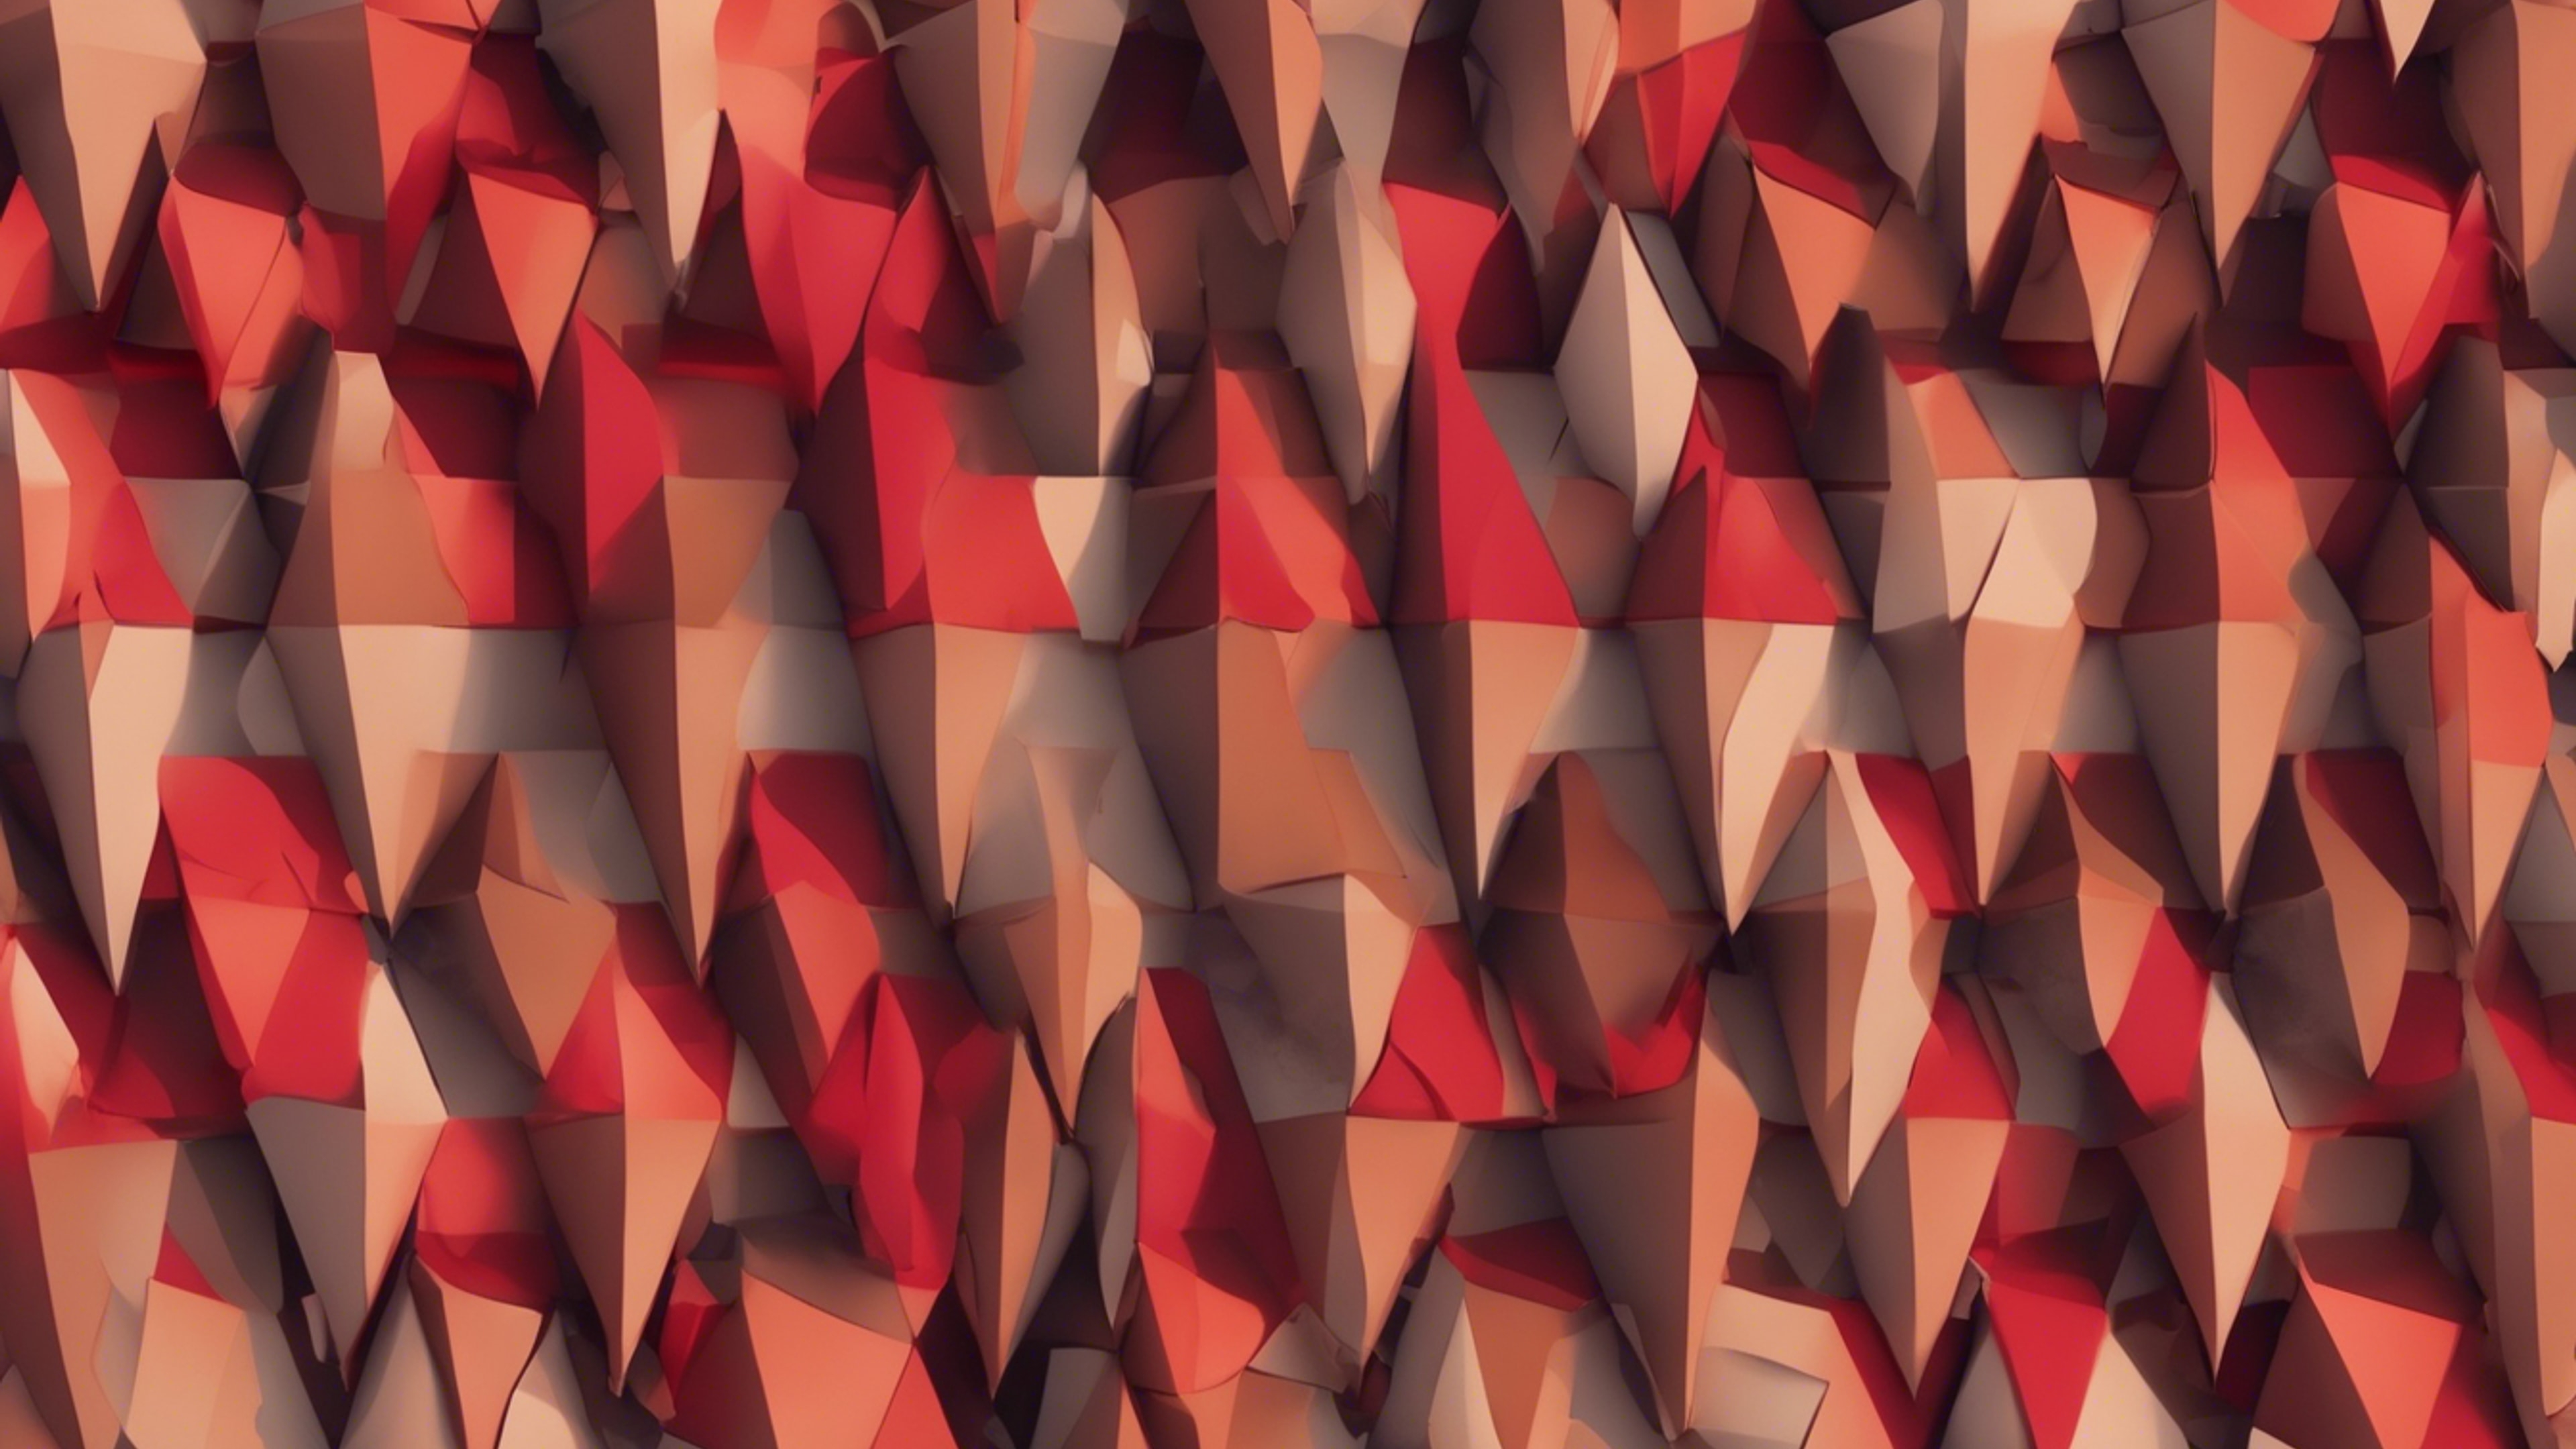 A geometrical abstract pattern consisting of trapeziums in shades of vibrant red and muted brown. کاغذ دیواری[25af3713355d4095863a]